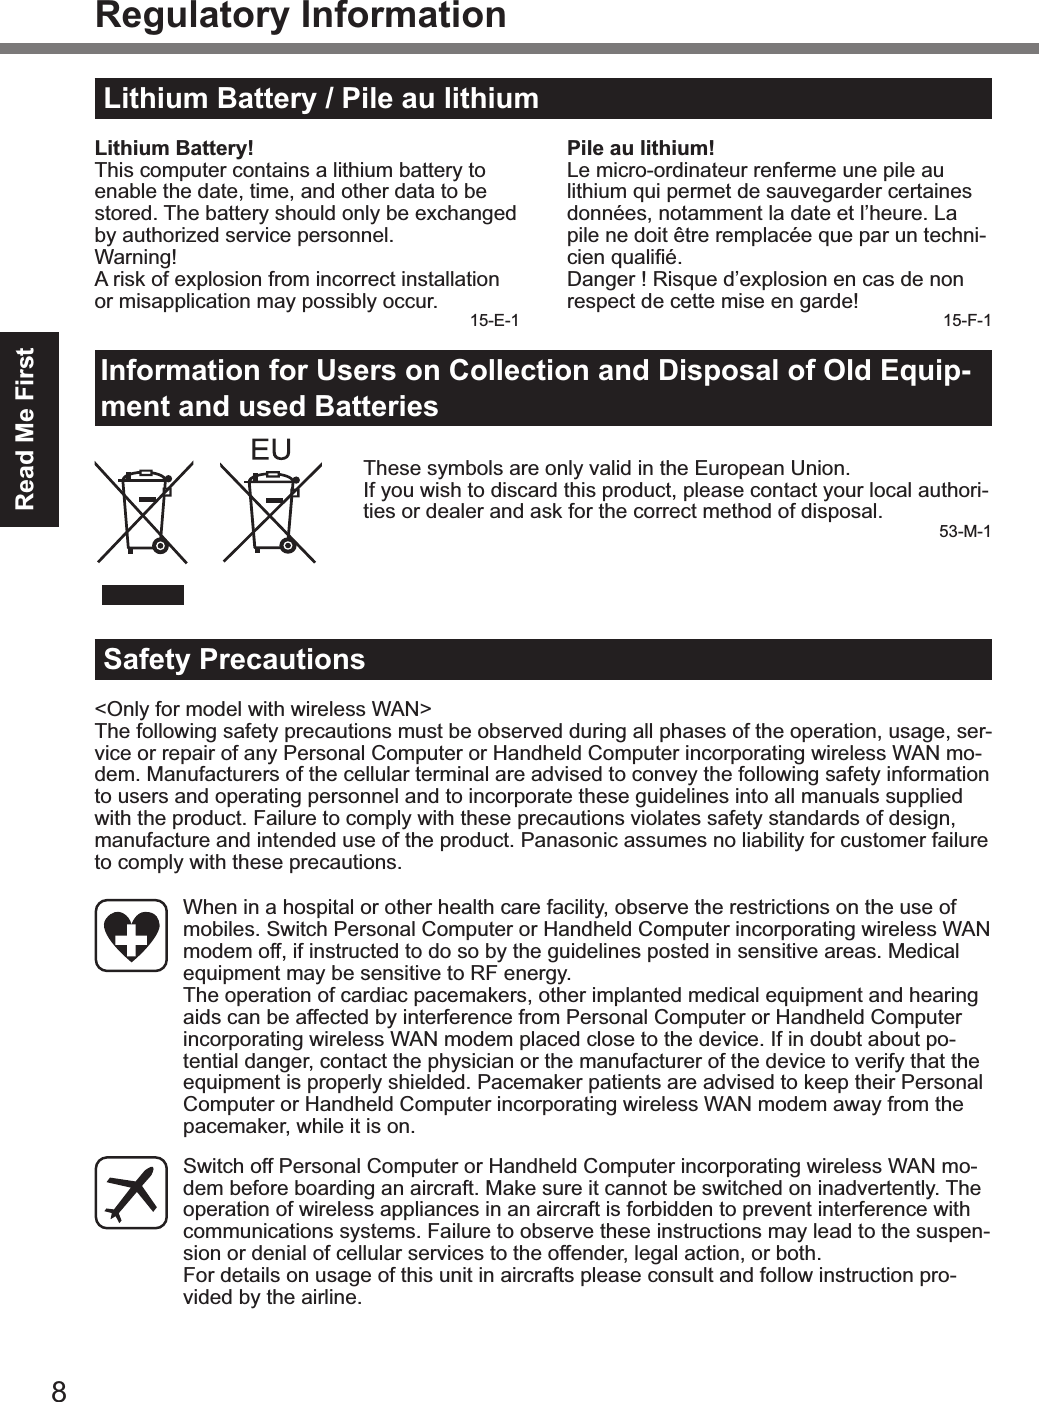 8Read Me FirstRegulatory InformationLithium Battery / Pile au lithiumLithium Battery!This computer contains a lithium battery to enable the date, time, and other data to be stored. The battery should only be exchanged by authorized service personnel.Warning!A risk of explosion from incorrect installation or misapplication may possibly occur. 15-E-1Pile au lithium!Le micro-ordinateur renferme une pile au lithium qui permet de sauvegarder certaines données, notamment la date et l’heure. La pile ne doit être remplacée que par un techni-$#,2%A1./#+X8Danger ! Risque d’explosion en cas de non respect de cette mise en garde! 15-F-1Information for Users on Collection and Disposal of Old Equip-ment and used BatteriesThese symbols are only valid in the European Union.If you wish to discard this product, please contact your local authori-ties or dealer and ask for the correct method of disposal. 53-M-1Safety Precautions&lt;Only for model with wireless WAN&gt;The following safety precautions must be observed during all phases of the operation, usage, ser-vice or repair of any Personal Computer or Handheld Computer incorporating wireless WAN mo-dem. Manufacturers of the cellular terminal are advised to convey the following safety information to users and operating personnel and to incorporate these guidelines into all manuals supplied with the product. Failure to comply with these precautions violates safety standards of design, manufacture and intended use of the product. Panasonic assumes no liability for customer failure to comply with these precautions.  When in a hospital or other health care facility, observe the restrictions on the use of mobiles. Switch Personal Computer or Handheld Computer incorporating wireless WAN modem off, if instructed to do so by the guidelines posted in sensitive areas. Medical equipment may be sensitive to RF energy.   The operation of cardiac pacemakers, other implanted medical equipment and hearing aids can be affected by interference from Personal Computer or Handheld Computer incorporating wireless WAN modem placed close to the device. If in doubt about po-tential danger, contact the physician or the manufacturer of the device to verify that the equipment is properly shielded. Pacemaker patients are advised to keep their Personal Computer or Handheld Computer incorporating wireless WAN modem away from the pacemaker, while it is on.  Switch off Personal Computer or Handheld Computer incorporating wireless WAN mo-dem before boarding an aircraft. Make sure it cannot be switched on inadvertently. The operation of wireless appliances in an aircraft is forbidden to prevent interference with communications systems. Failure to observe these instructions may lead to the suspen-sion or denial of cellular services to the offender, legal action, or both. For details on usage of this unit in aircrafts please consult and follow instruction pro-vided by the airline.&amp;(39&lt;#6A(&lt;)OMAAA1+A/KPFD 